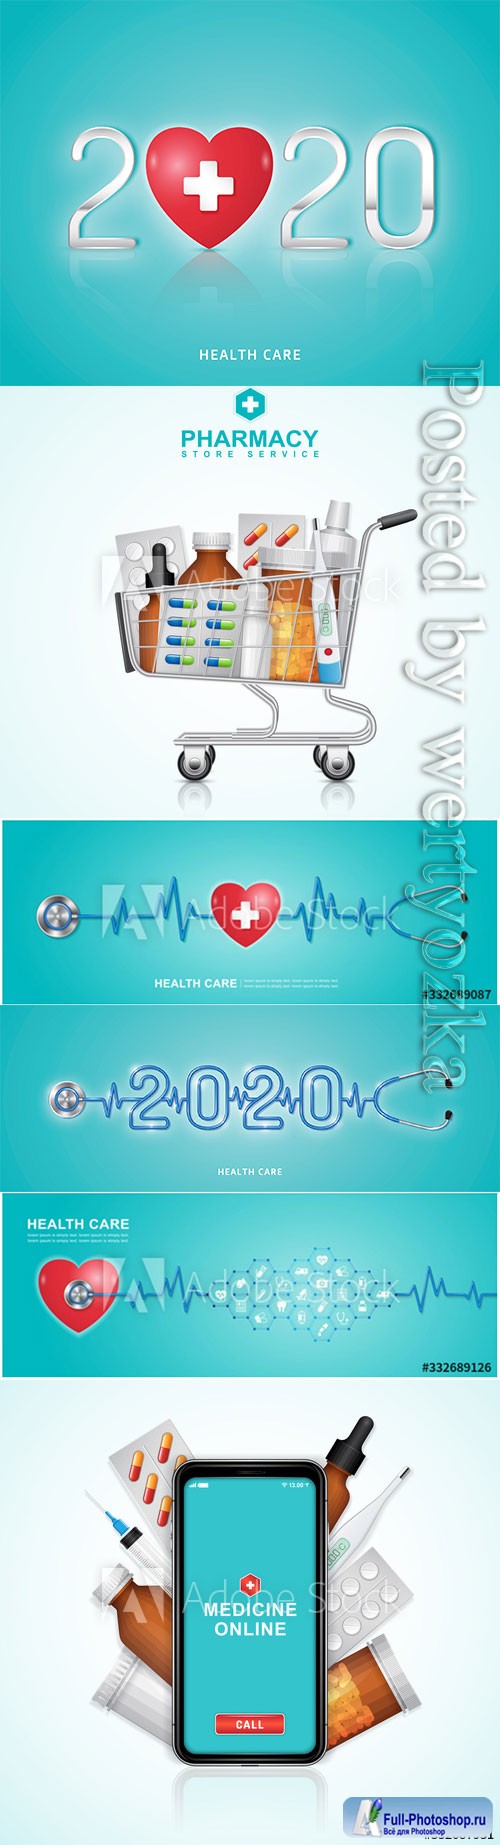 Healthcare and medical concept vector design